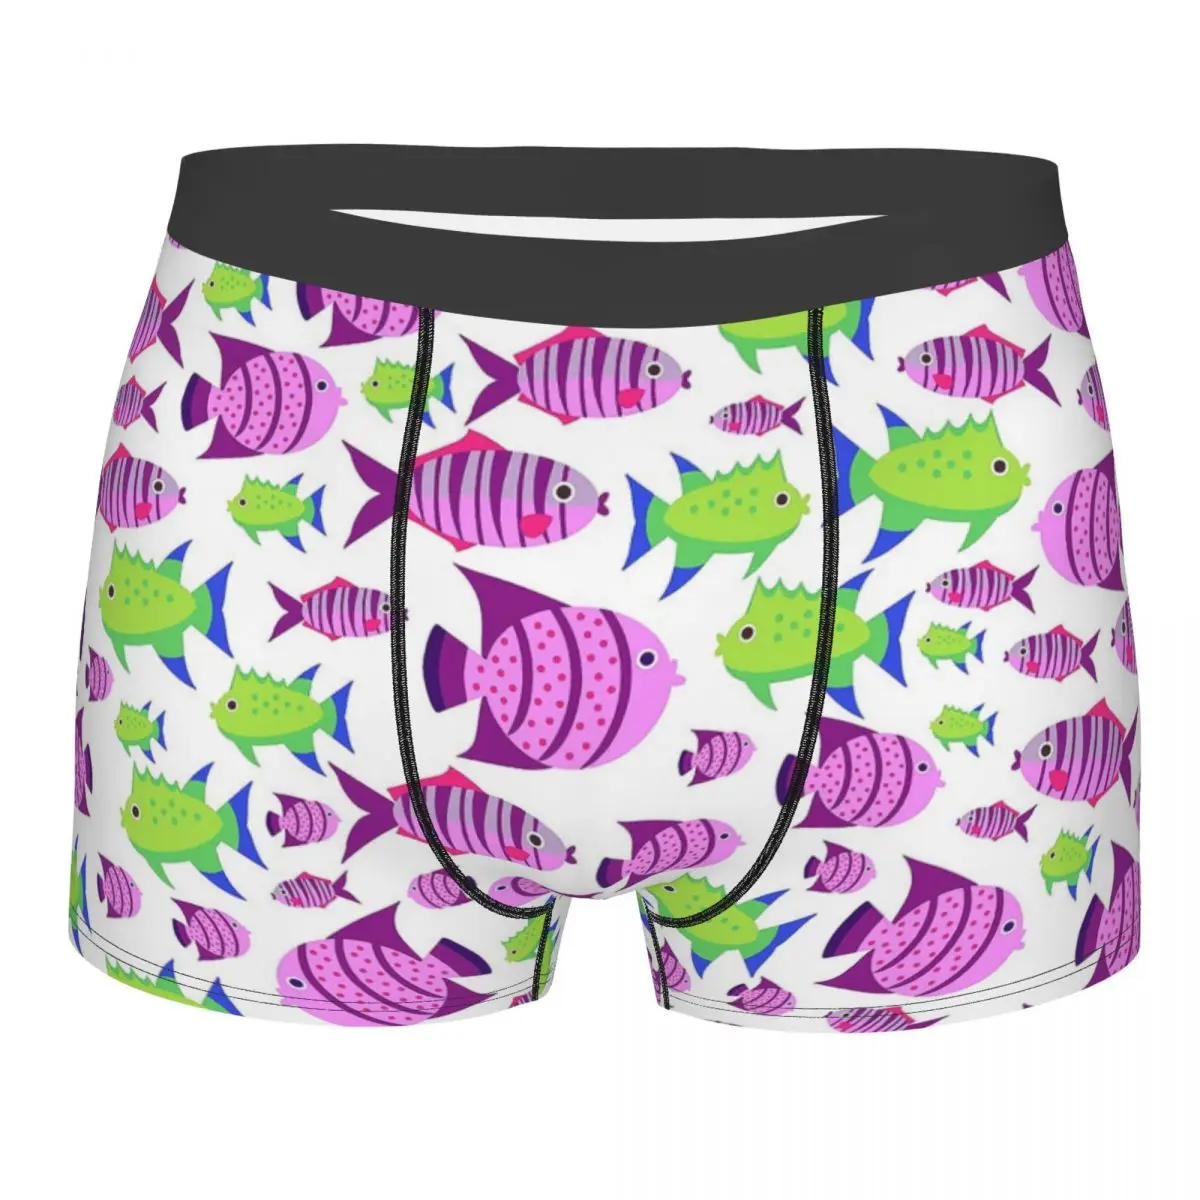 

Animals of The Sea Clever Gentle Free And Happy The Green Fish Underpants Cotton Panties Man Underwear Print Shorts Boxer Briefs